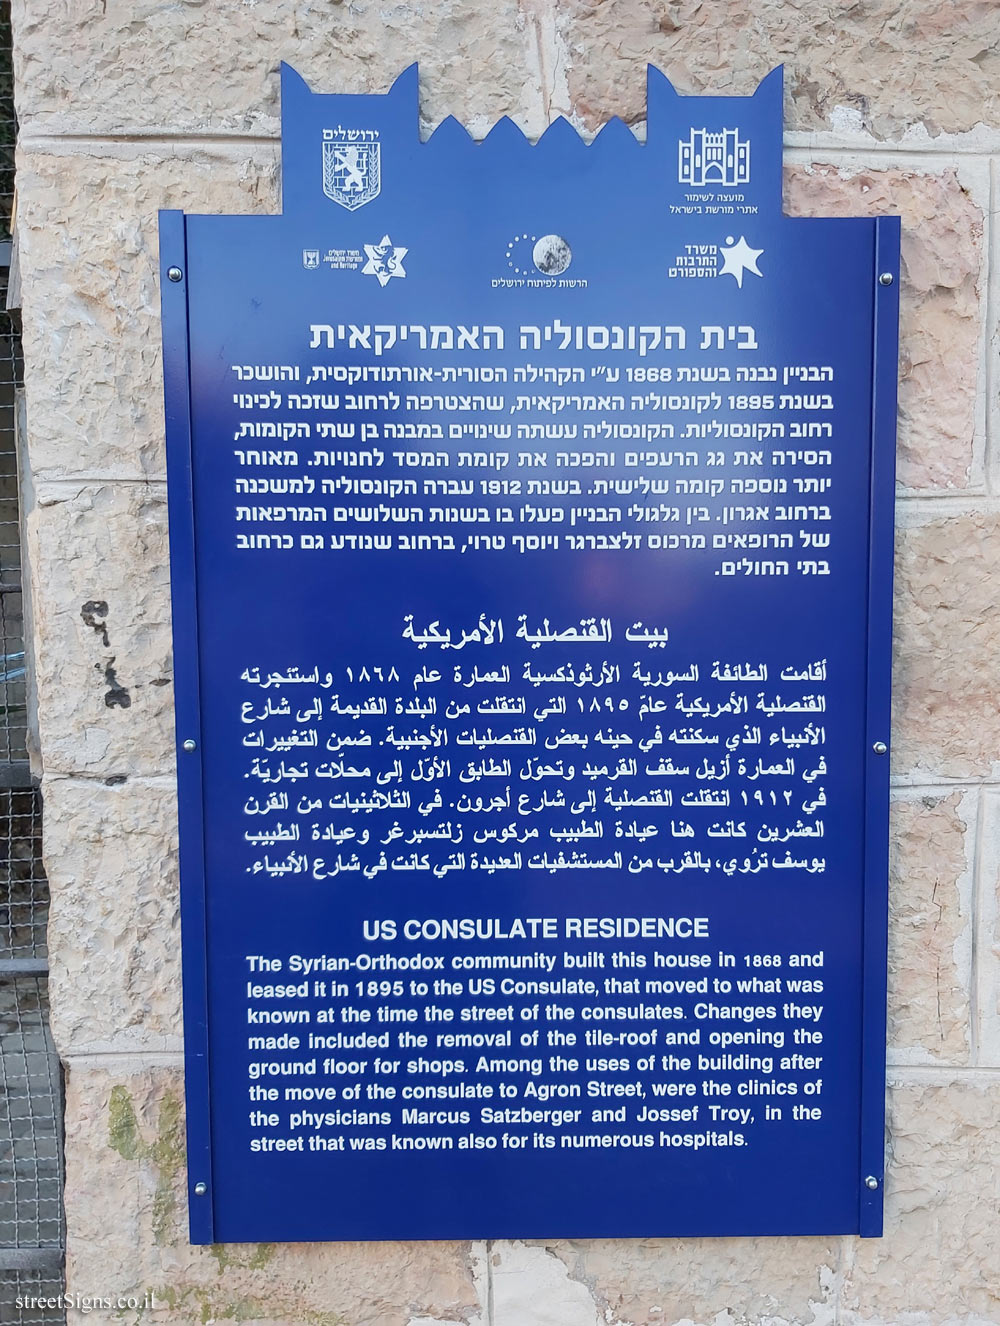 Jerusalem - Heritage Sites in Israel - US Consulate Residence